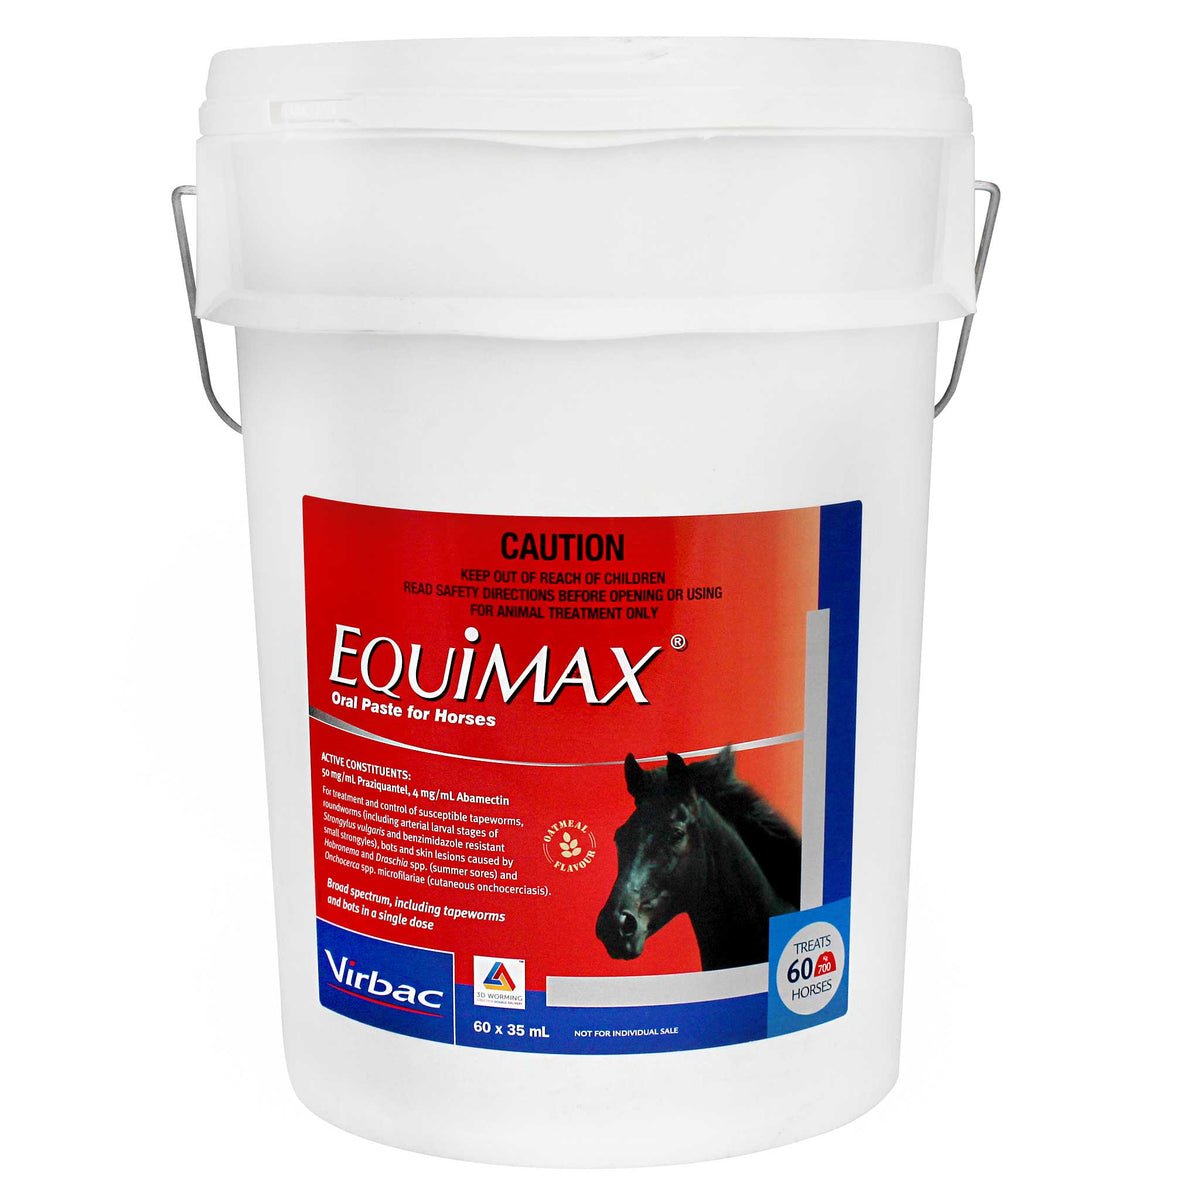 Equimax Oral Paste for Horses - Stable Pail 60 syringes